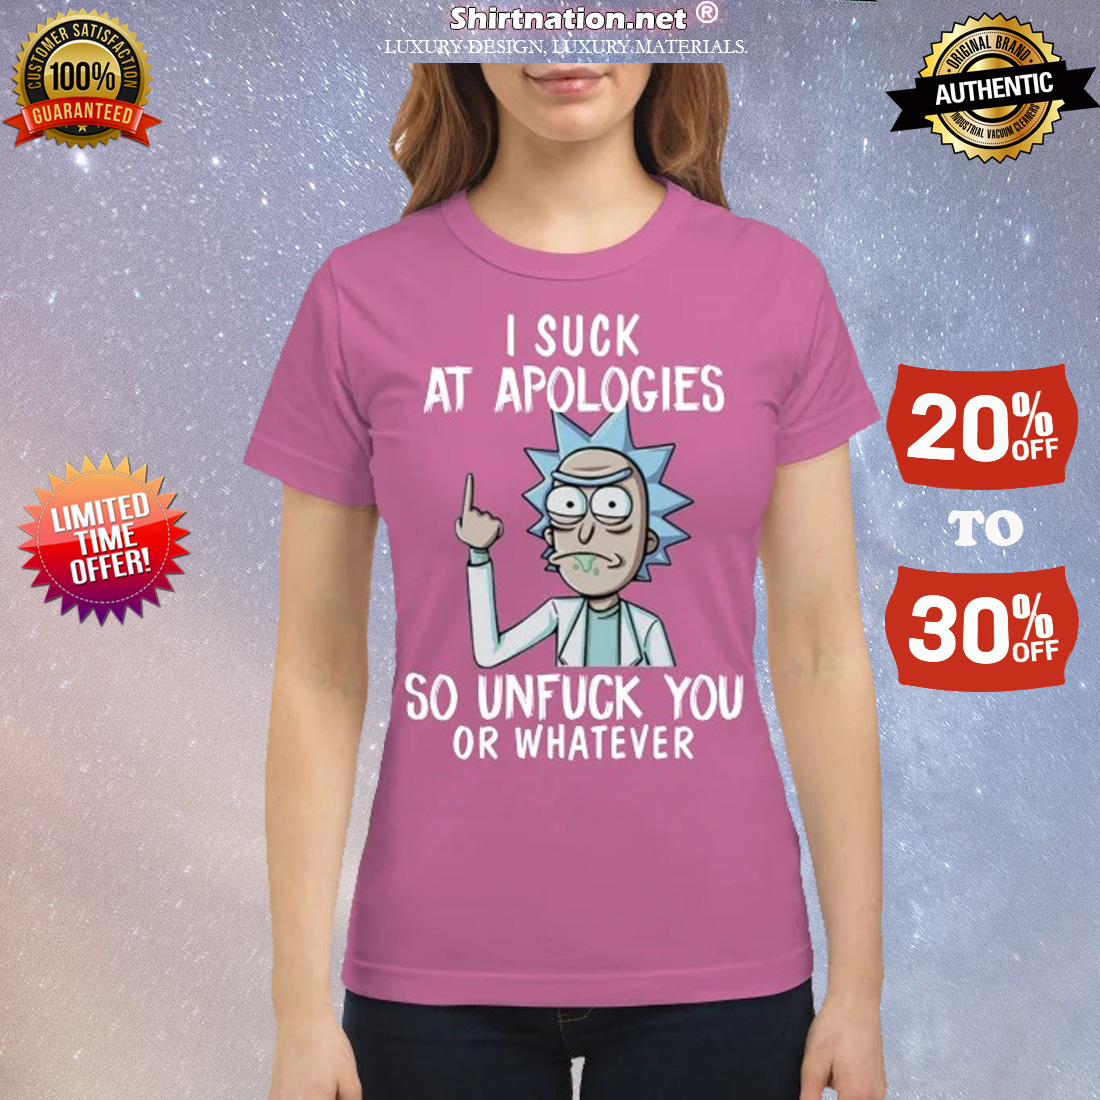 Rick Sanchez I suck at apologies so unfuck you or whatever classic shirt